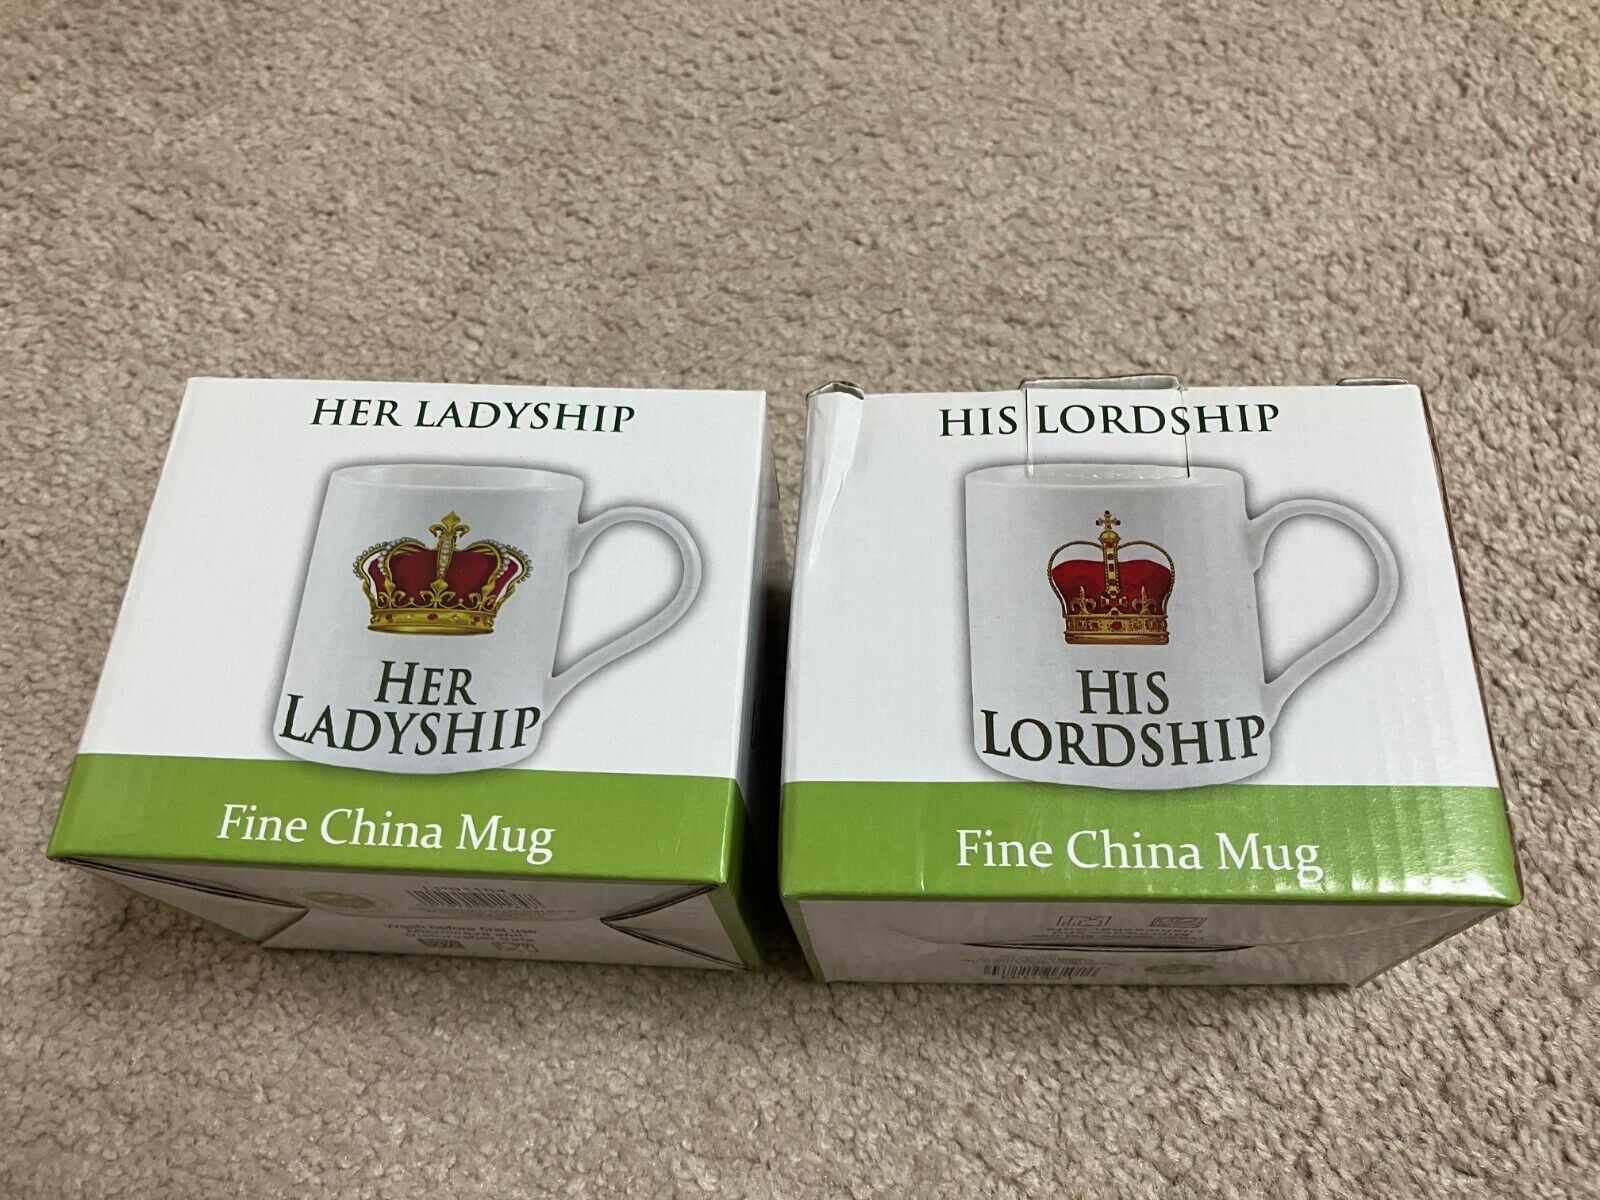  His Lordship and Her Ladyship Mugs Leonardo Collection New in Box Ships from NJ